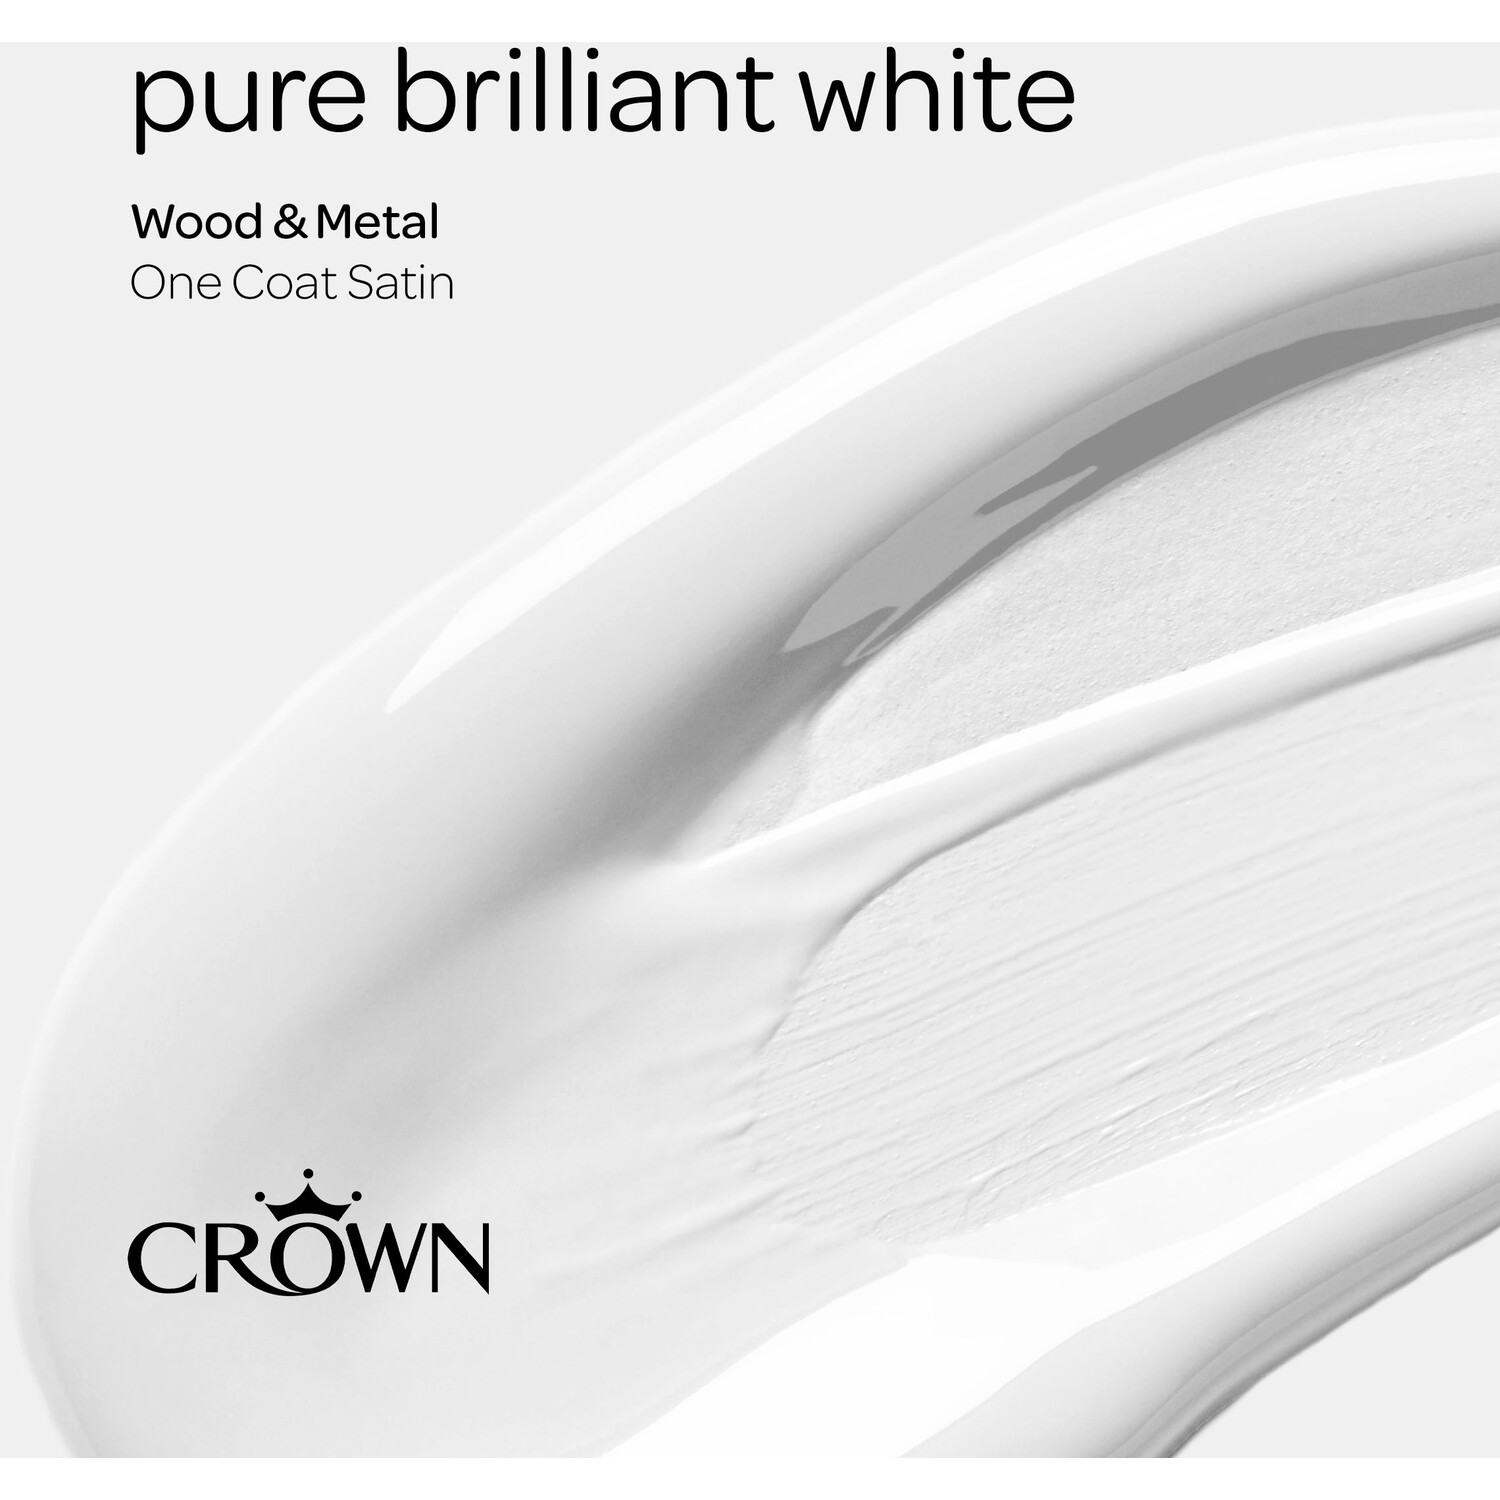 Crown Wood and Metal One Coat Satin - Pure Brilliant White Image 4